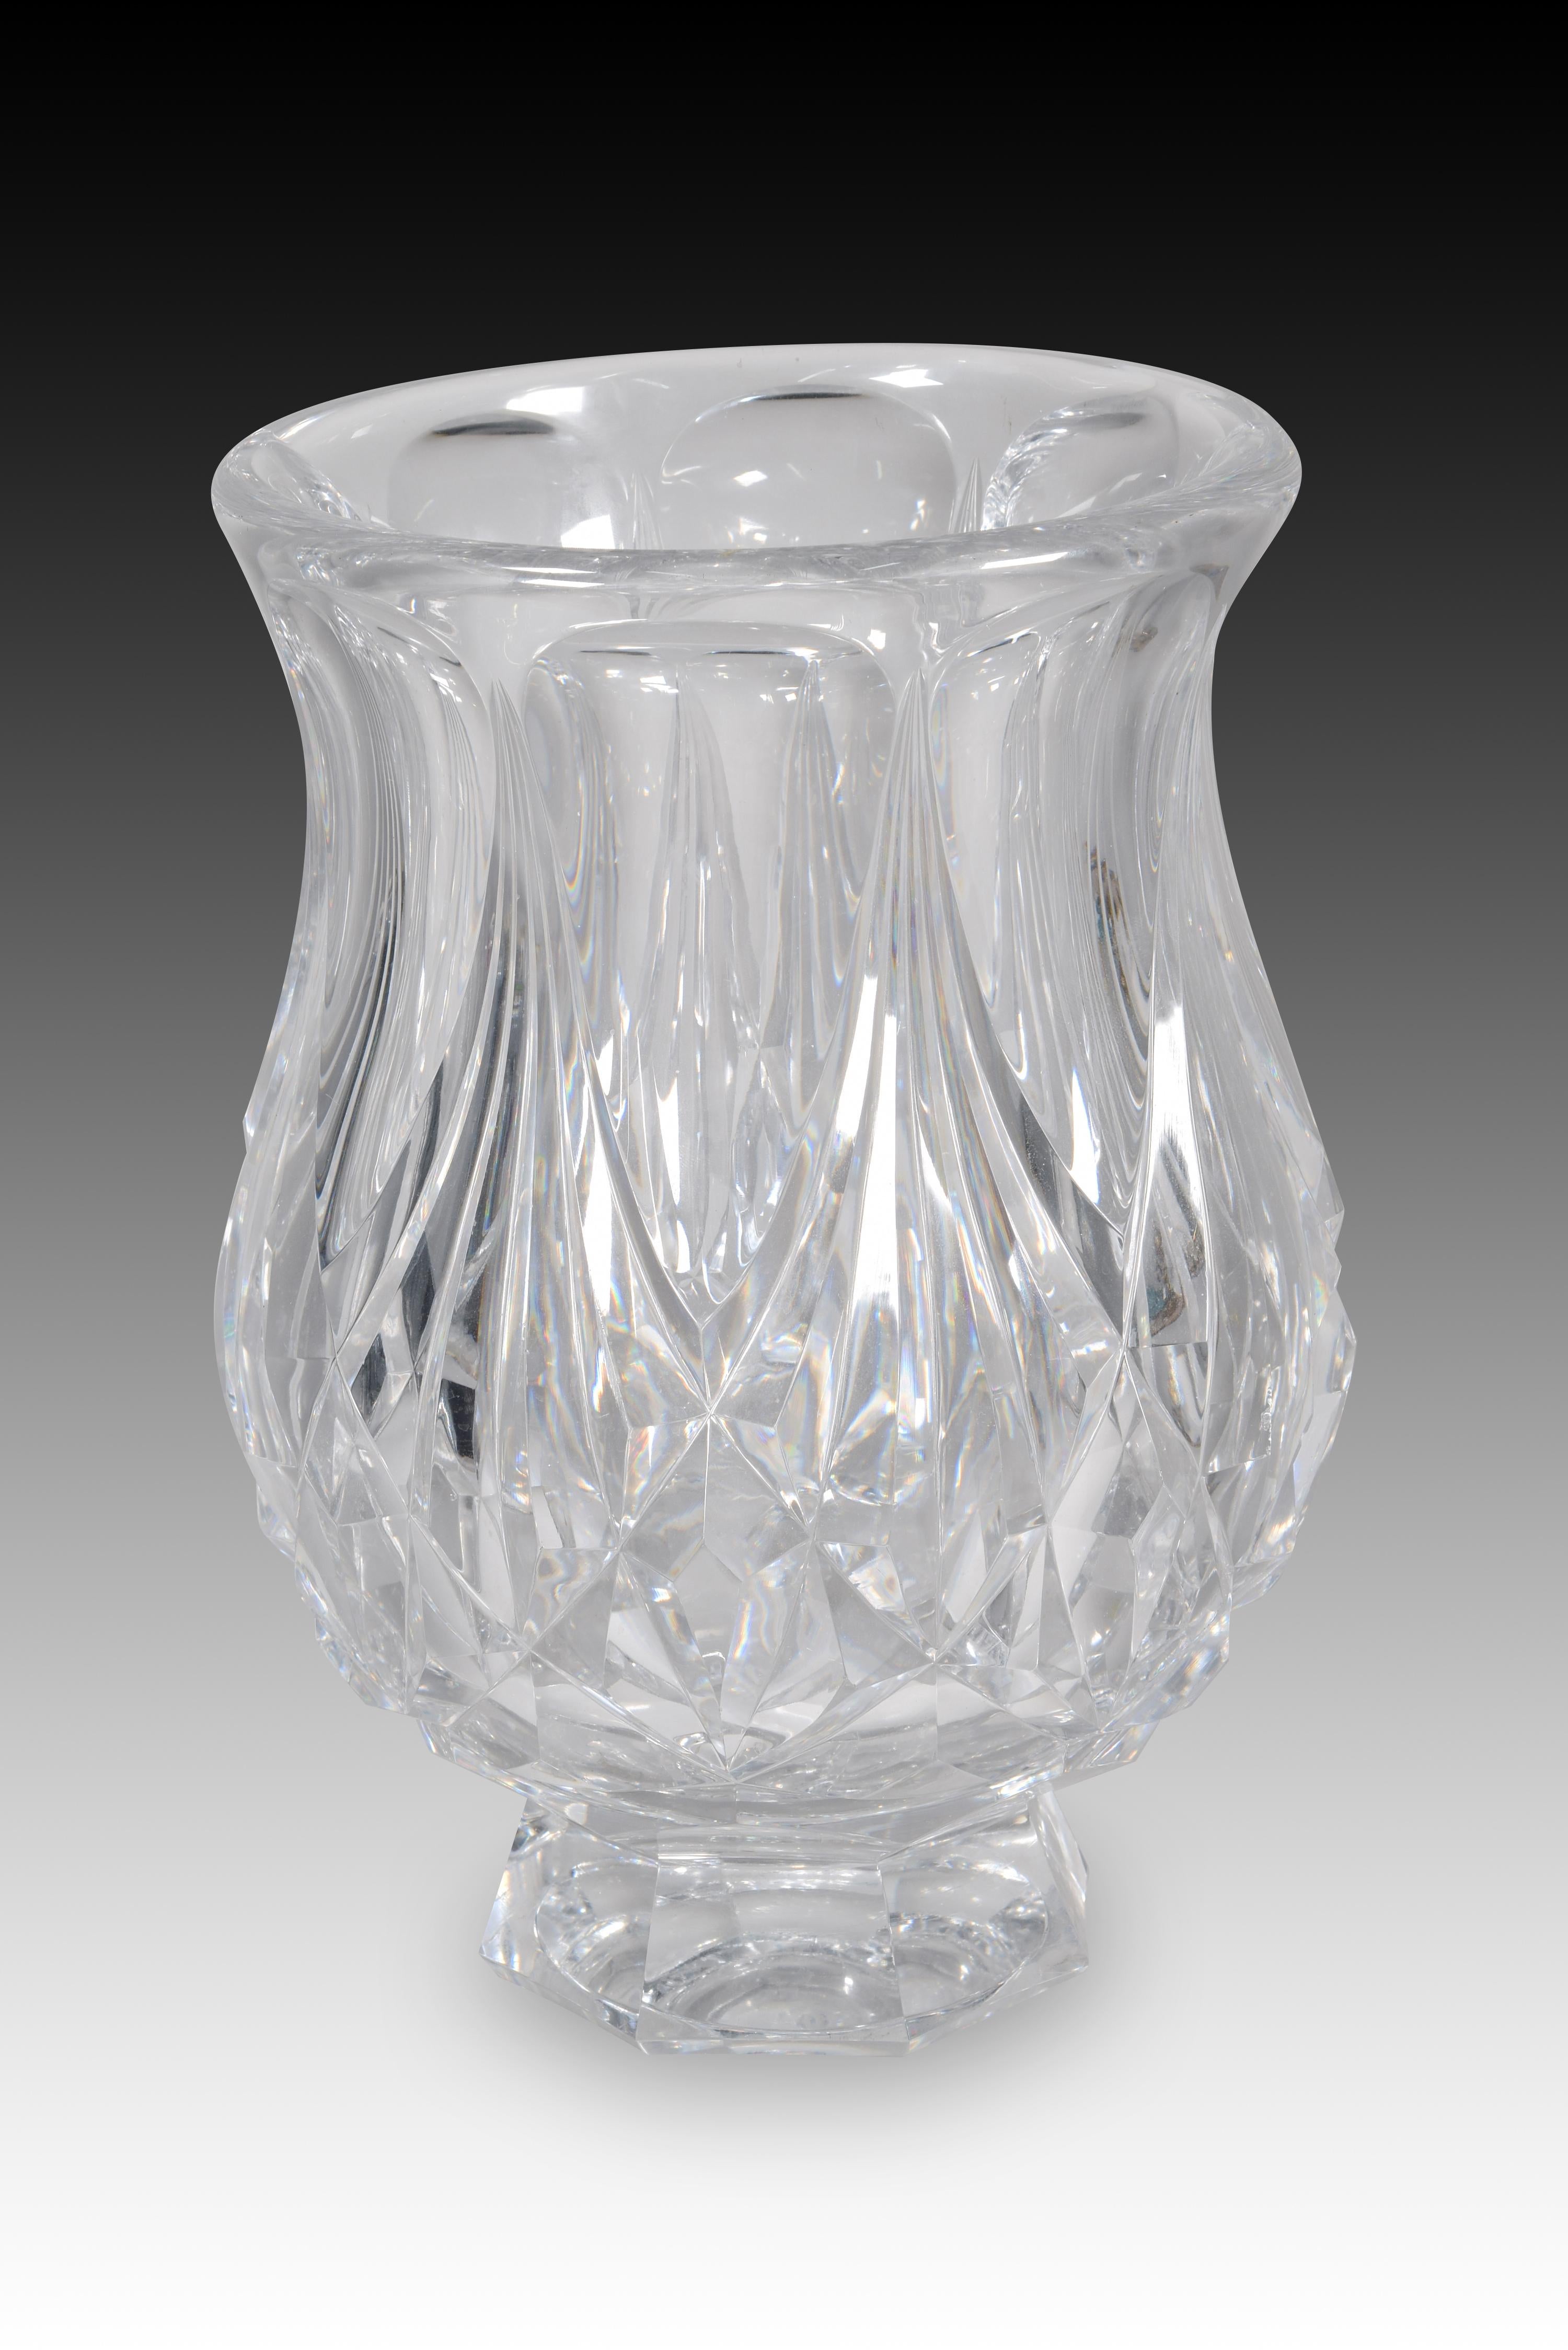 Centerpiece in the shape of a tulip. Crystal (glass) cut. Twentieth century. 
Centerpiece in cut glass in the shape of a tulip and cup, with a foot, decorated on the outside with lines forming geometric elements.
 Weight: 11.4 kg. · Size: 23x23x34